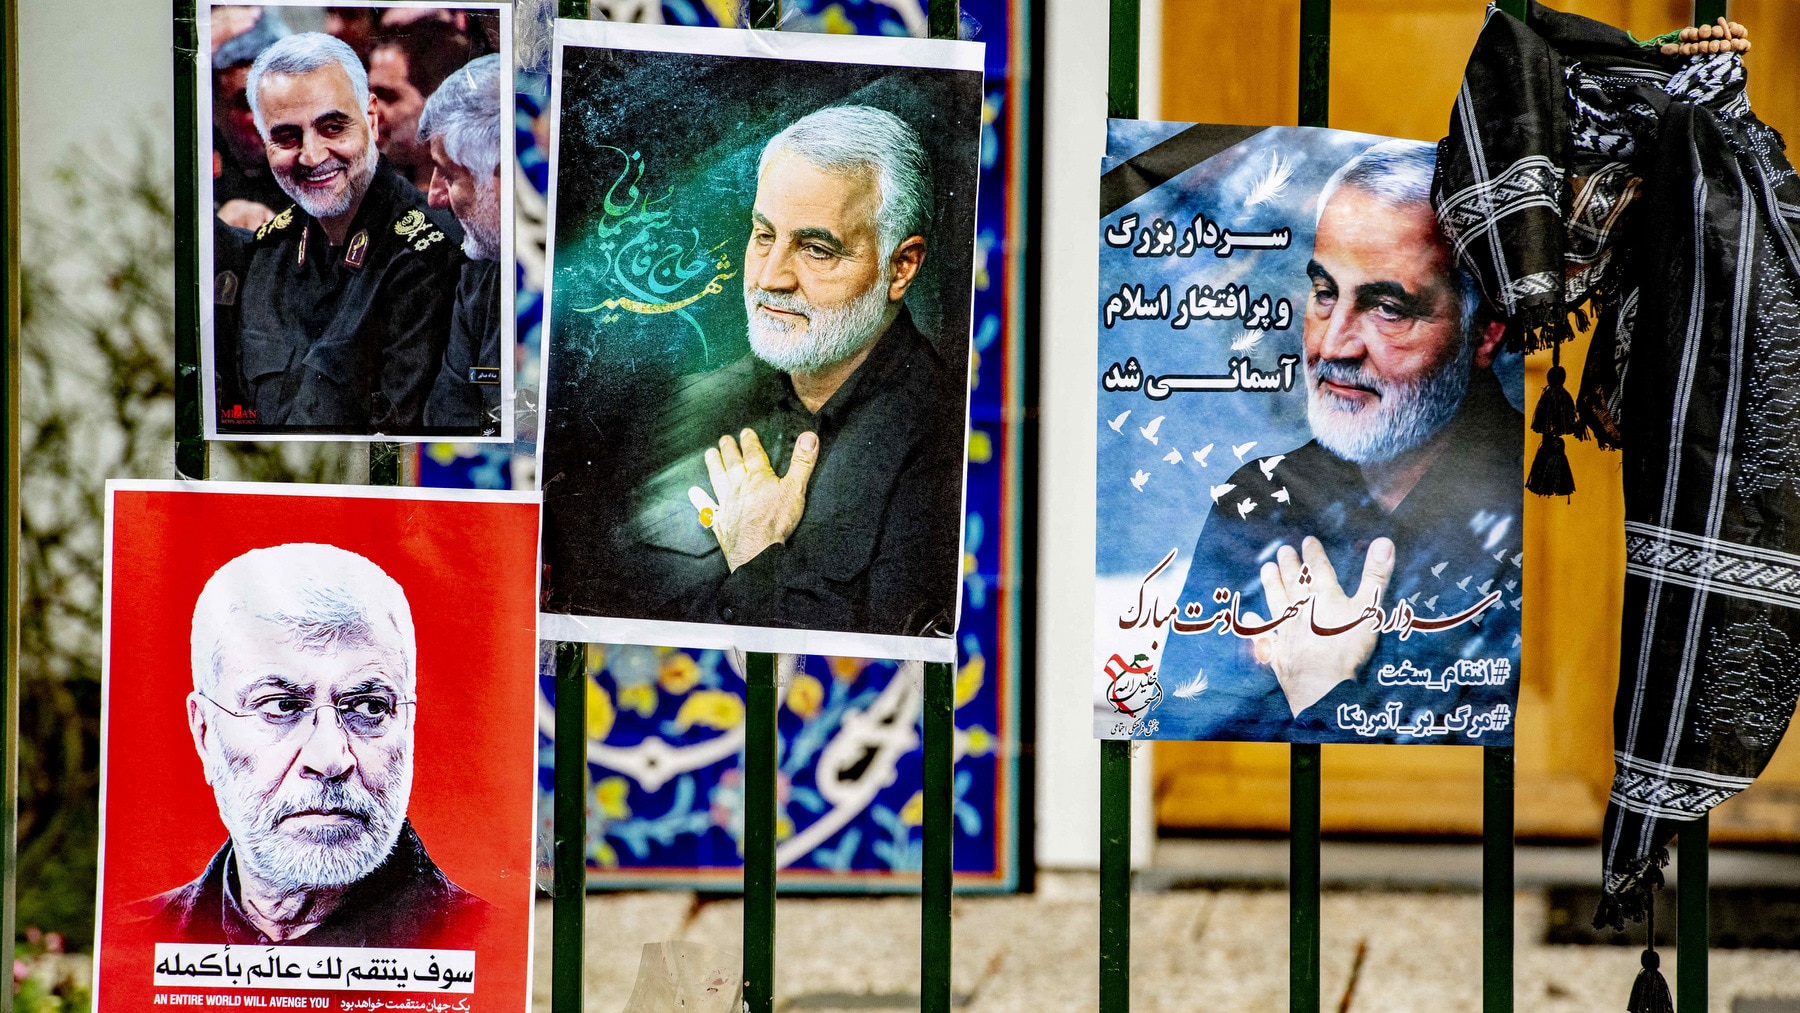 Flowers and posters at the gate of the Iranian embassy in The Hague, Netherlands.